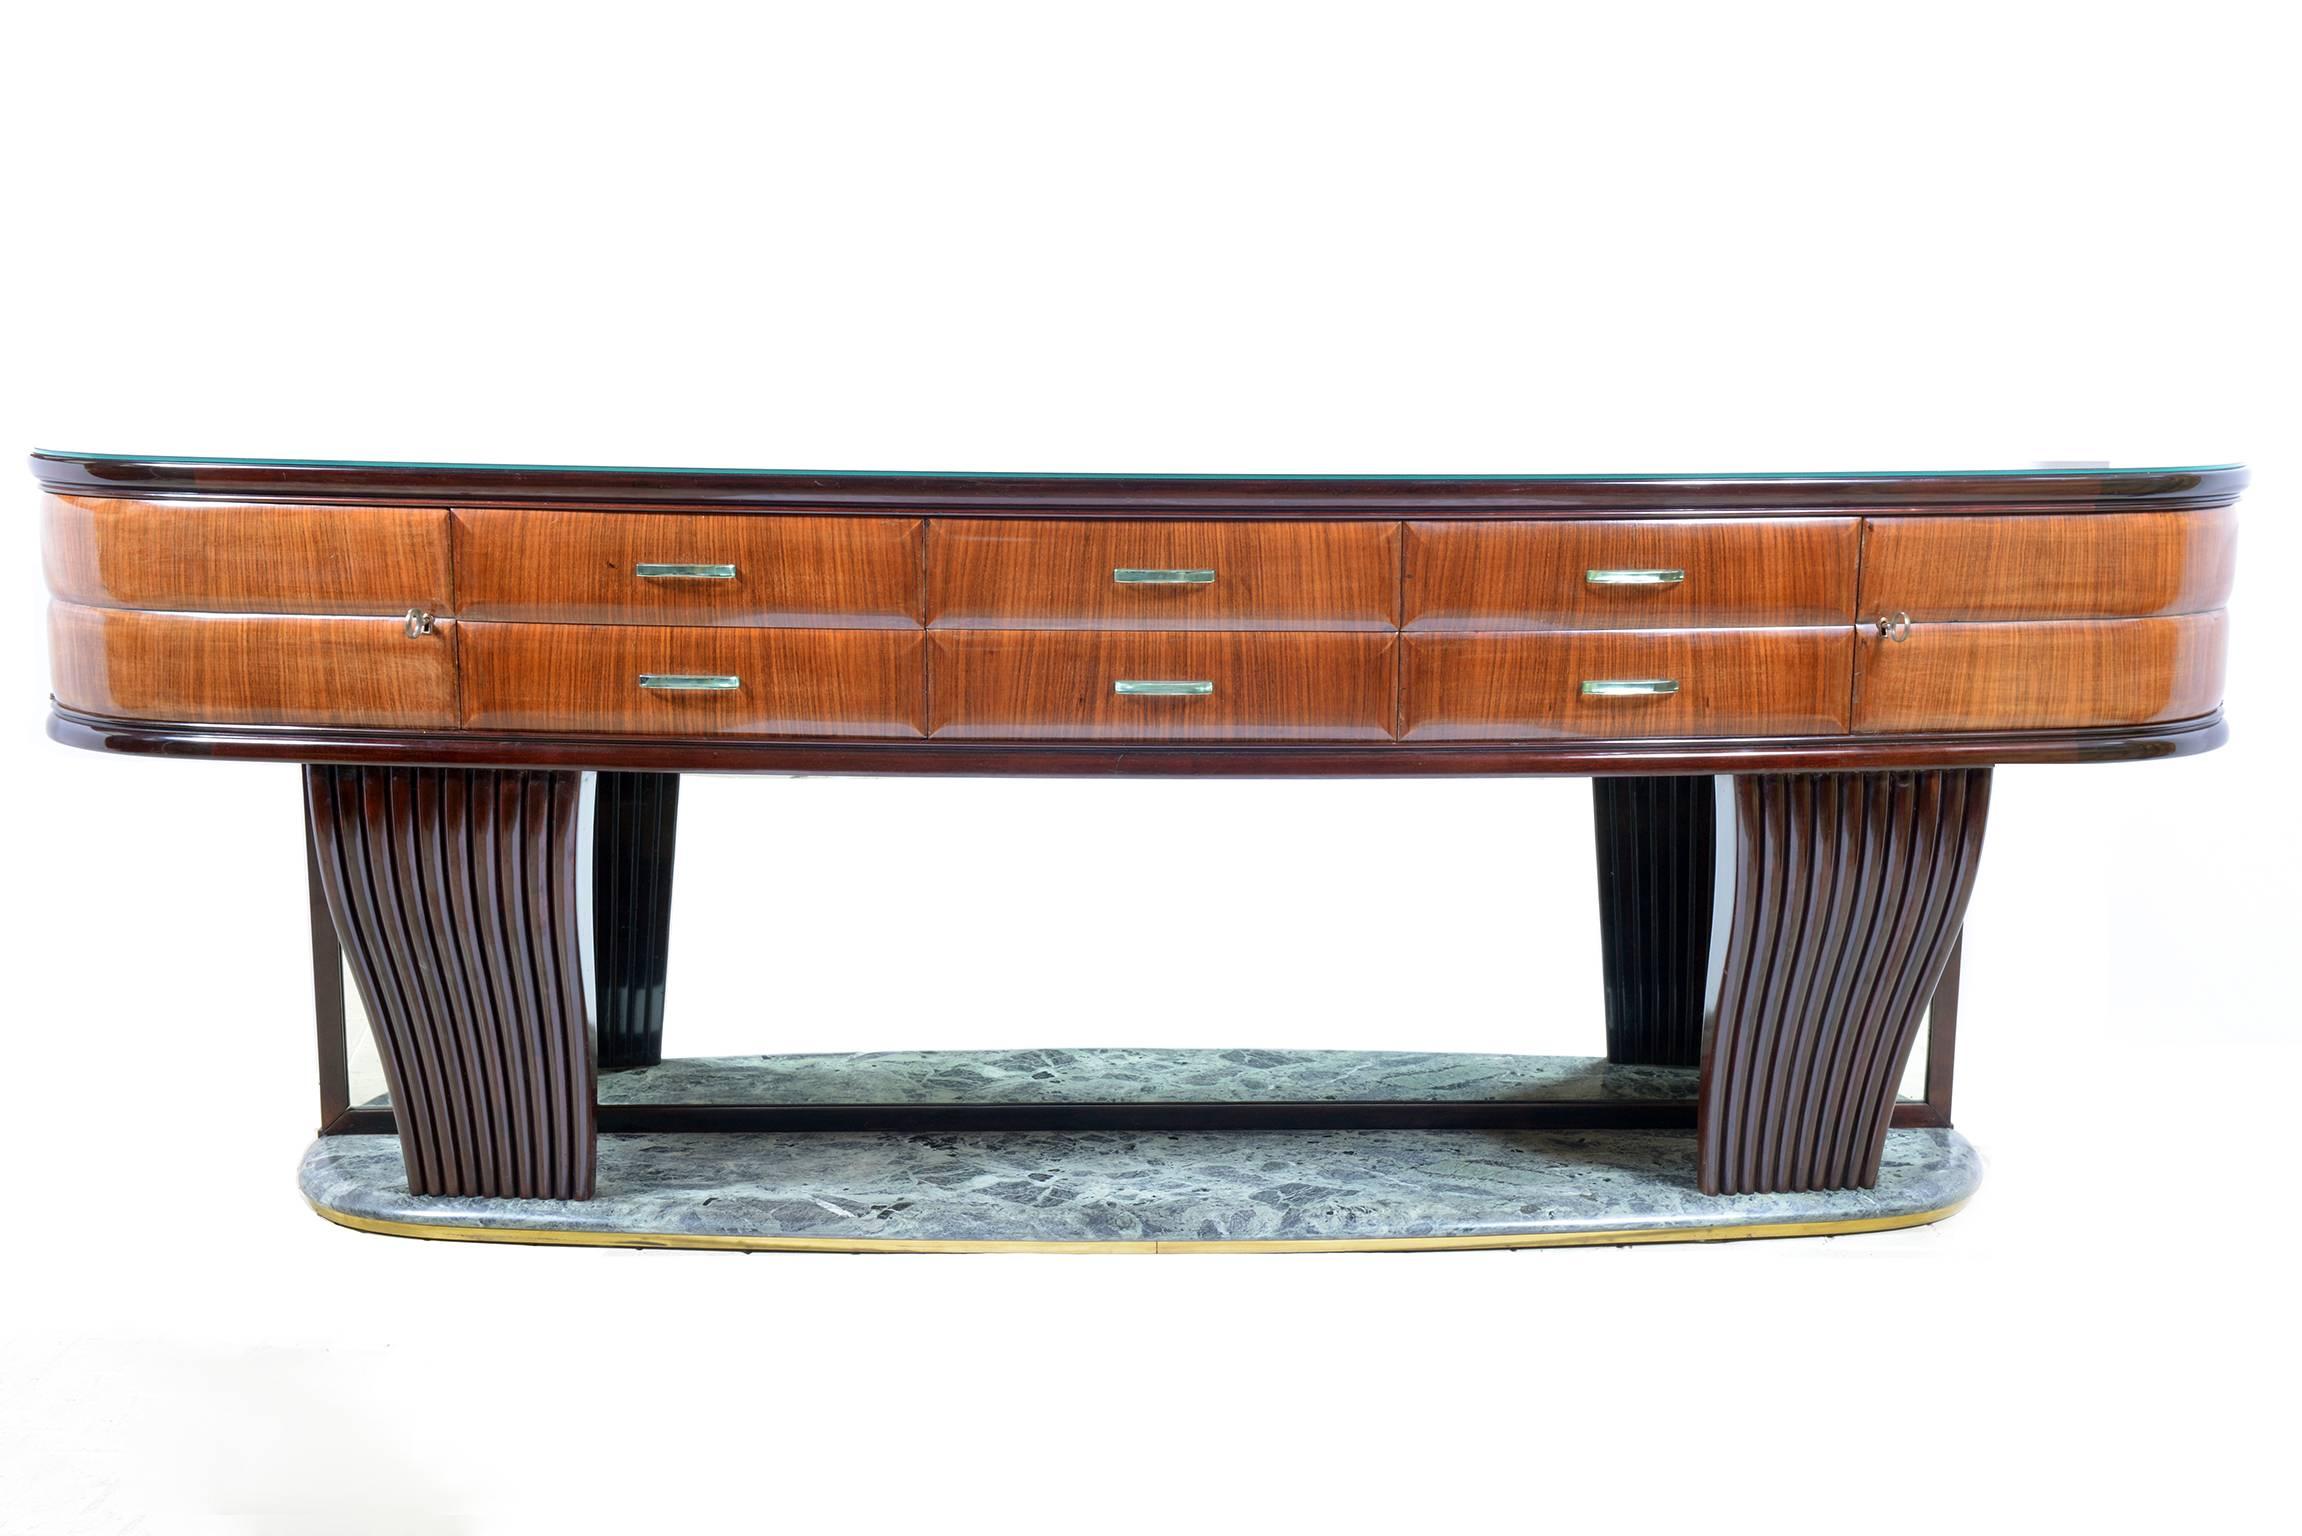 Demilune shaped rosewood sideboard, six drawers with crystal bevelled and mirrored handles, two curved doors.
Interiors on maples wood.
The top is in black glass and the base on an alp marble rimmed on brass on the floor part.
Two grooved curved